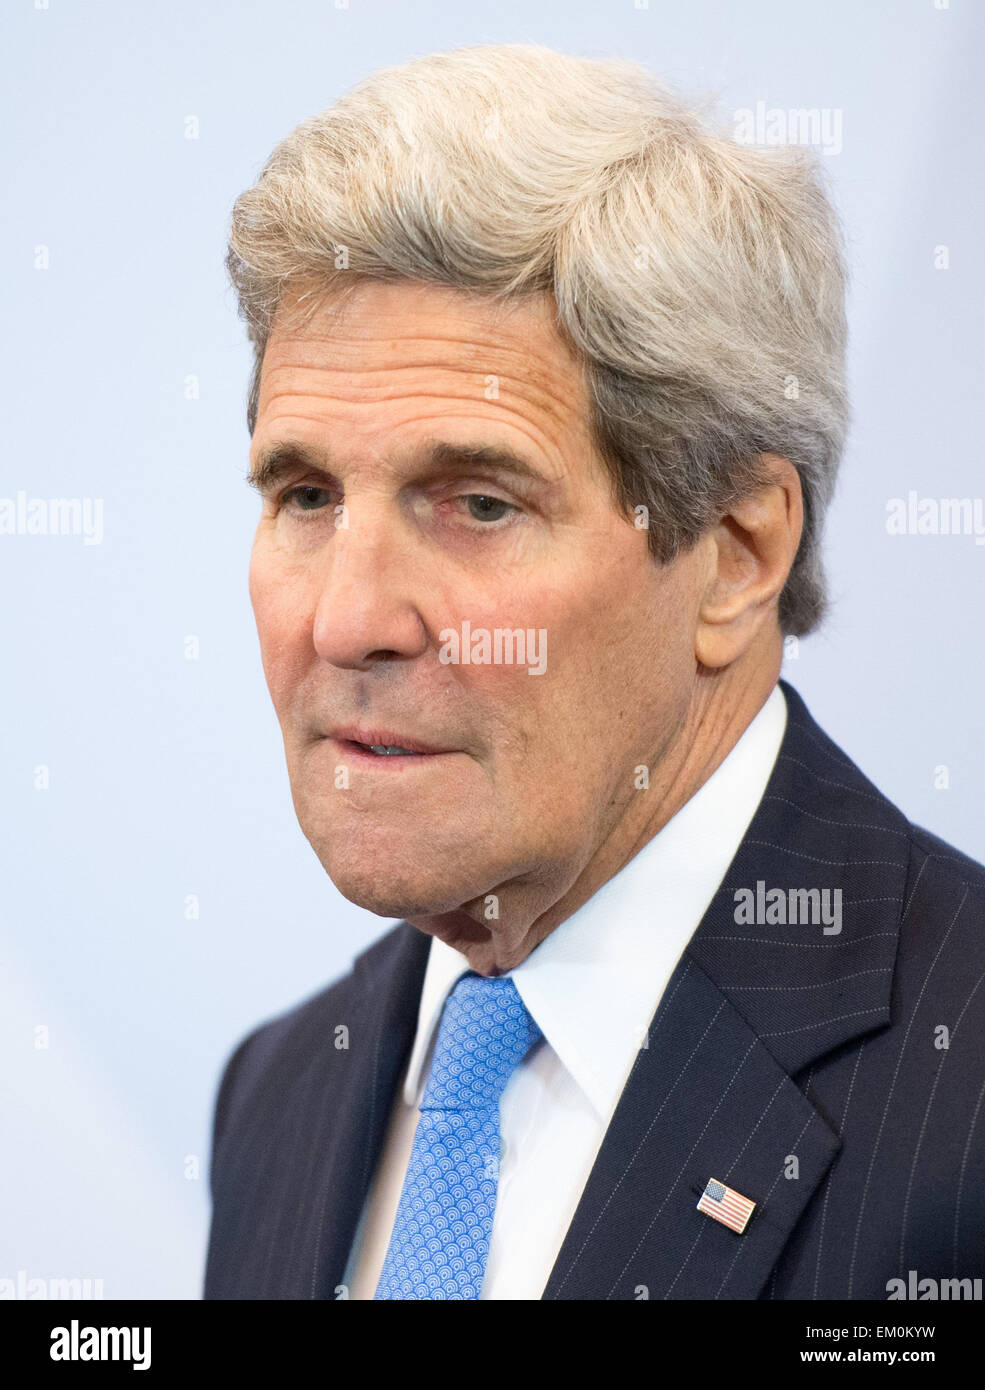 Luebeck, Germany. 15th Apr, 2015. US Secretary of State John Kerry attends a meeting of G7 Foreign Ministers in Luebeck, Germany, 15 April 2015. The meeting takes place from 14 April to 15 April 2015. Credit:  dpa picture alliance/Alamy Live News Stock Photo